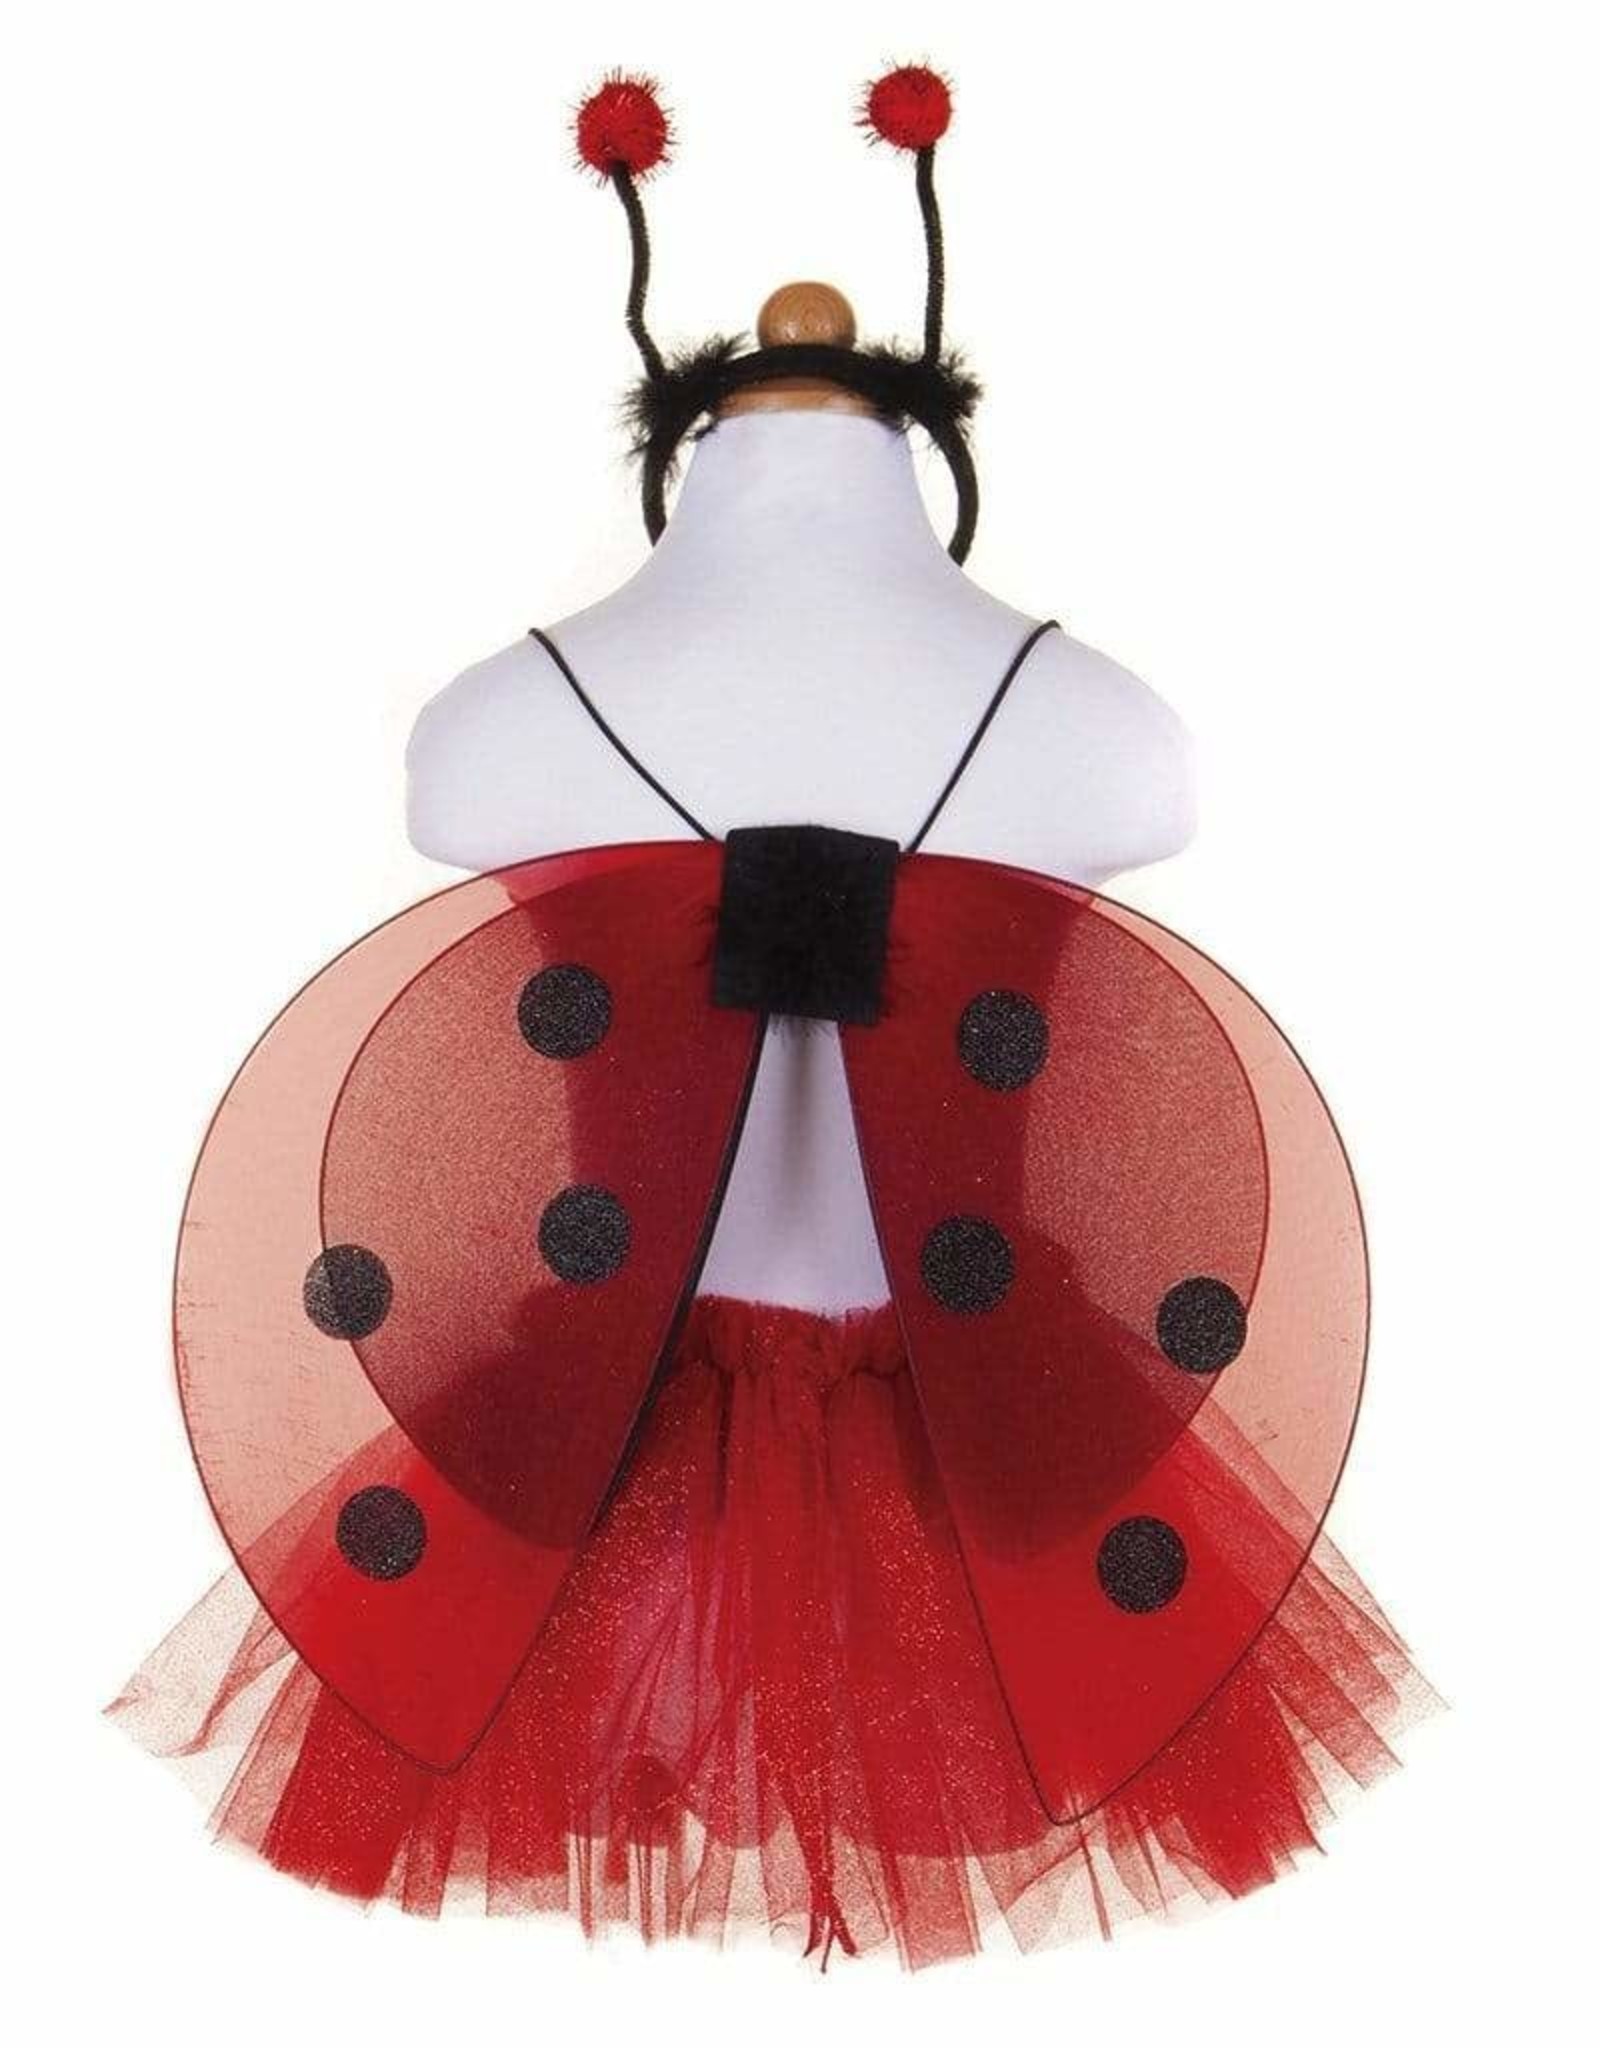 Great Pretenders Glitter Ladybug Tutu With Wings & HB,  Size 4-6